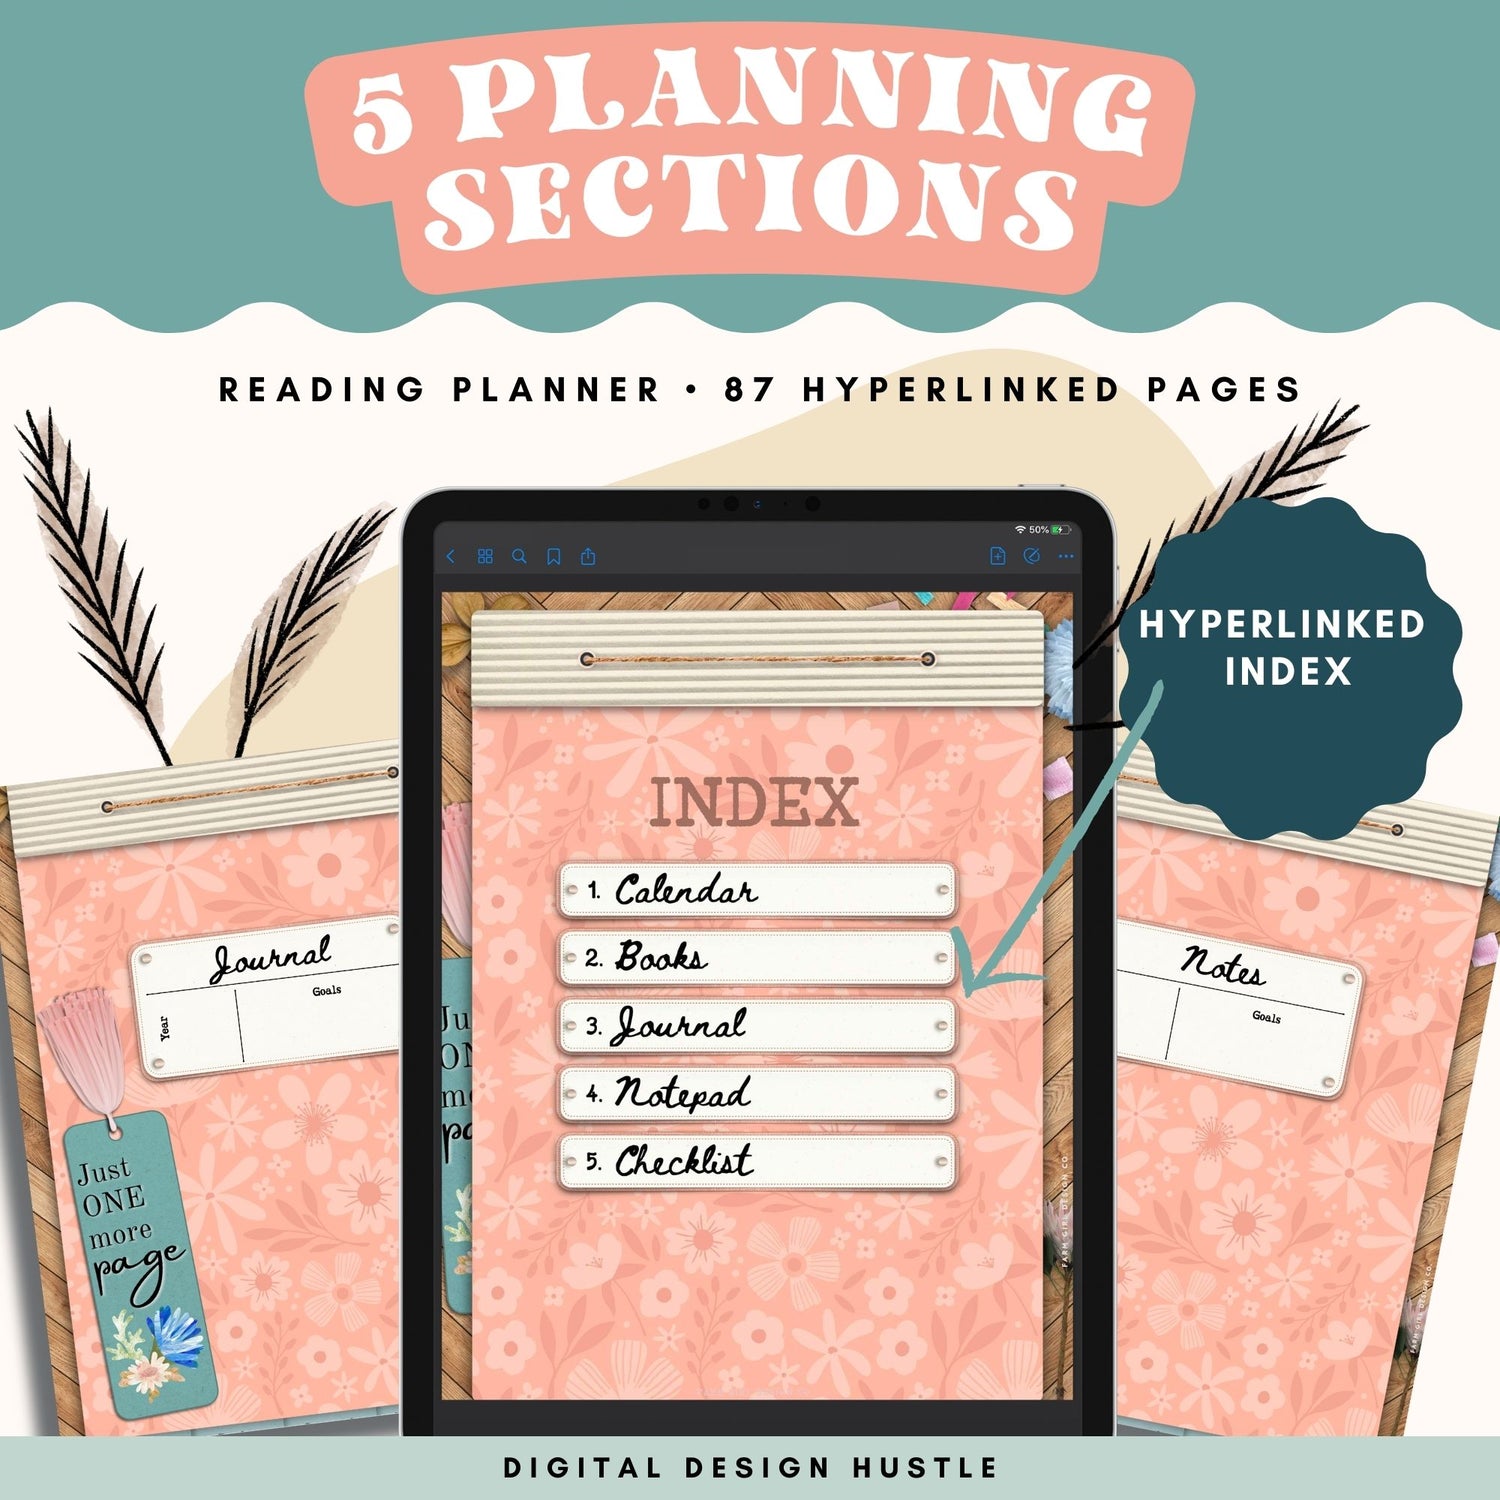 This dark floral-themed digital reading notebook is a fun way to track reading progress, take notes, and write ideas and thoughts in the digital journal. This digital reading planner 5 different hyperlinked sections: Reading Planner, Journal, Calendar, Notes, and Checklists. 